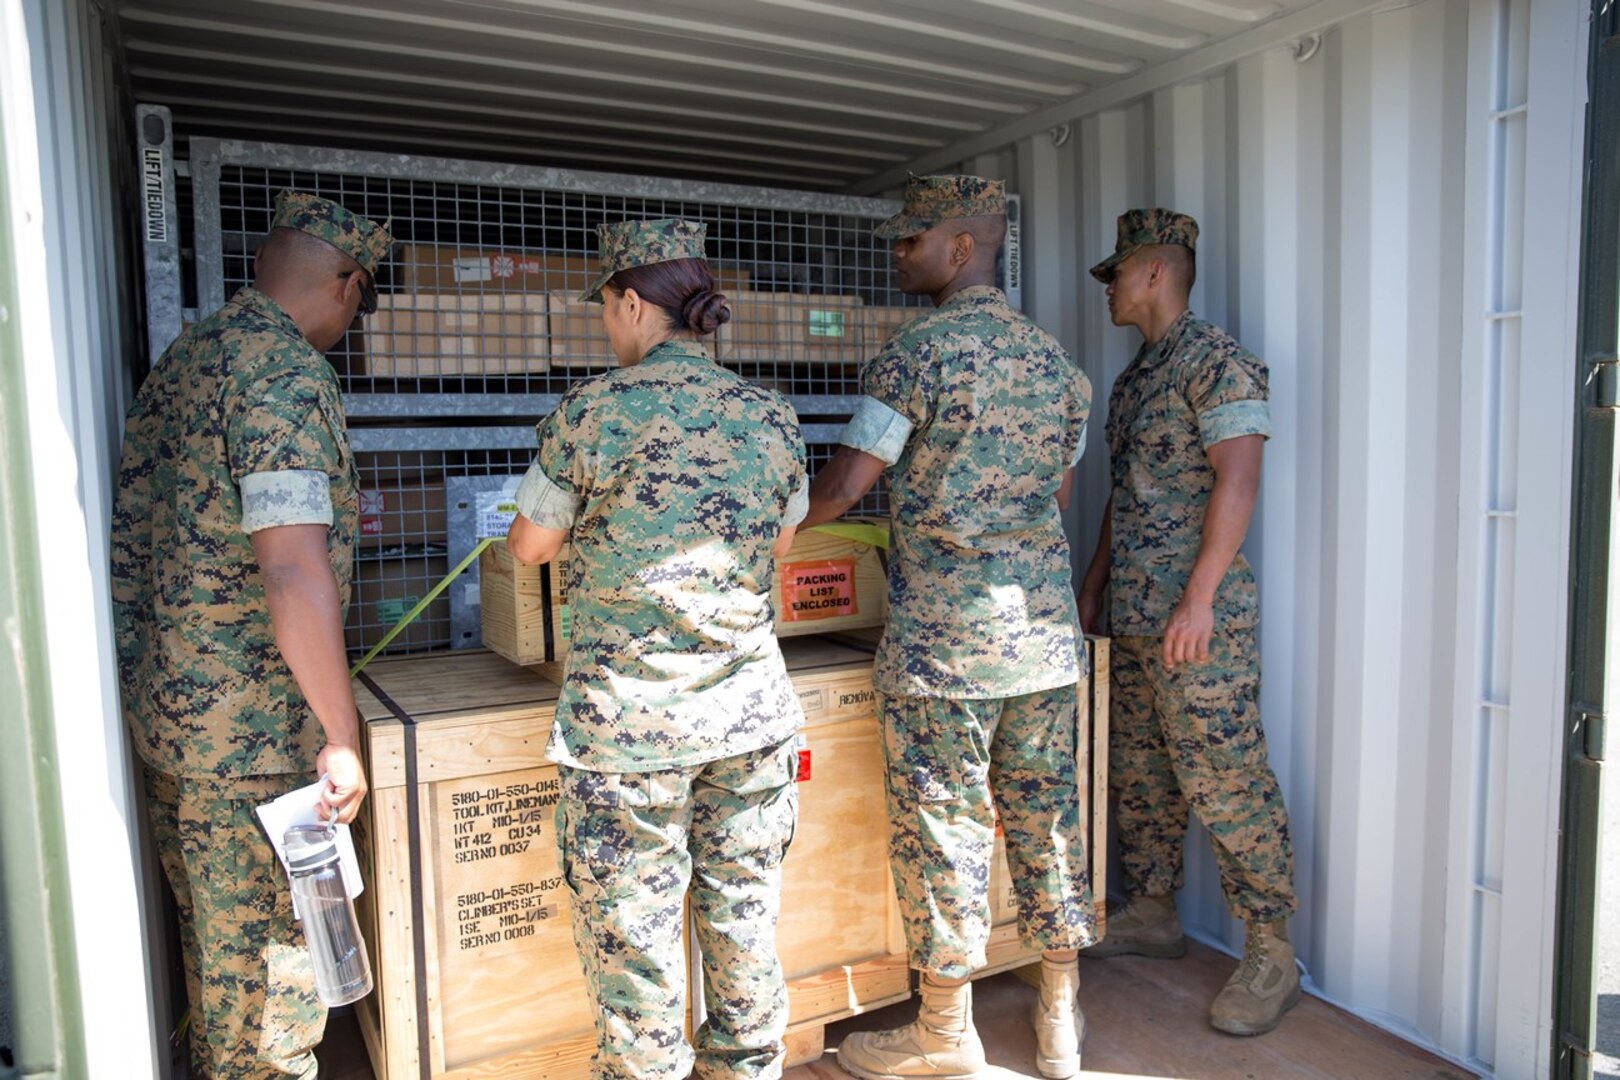 U.S. Marines with several units within the I Marine Expeditionary Force observed a display of how to load and stack a shipping container during Pacific Horizon on Camp Pendleton, Calif., July 12, 2017. Pacific Horizon 2017 is a Maritime Prepositioning Force (MPF) exercise designed to train I Marine Expeditionary Force (I MEF) and components of Naval Beach Group 1 (NBG-1) Marines and Sailors on arrival and assembly operations as well as follow-on Marine Air Ground Task Force actions to ensure that the right equipment, supplies and tools get to the right people to be employed in a crisis response, humanitarian assistance and amassing combat power ashore from sea. (U.S. Marine Corps photo by Lance Cpl. Roxanna Gonzalez)